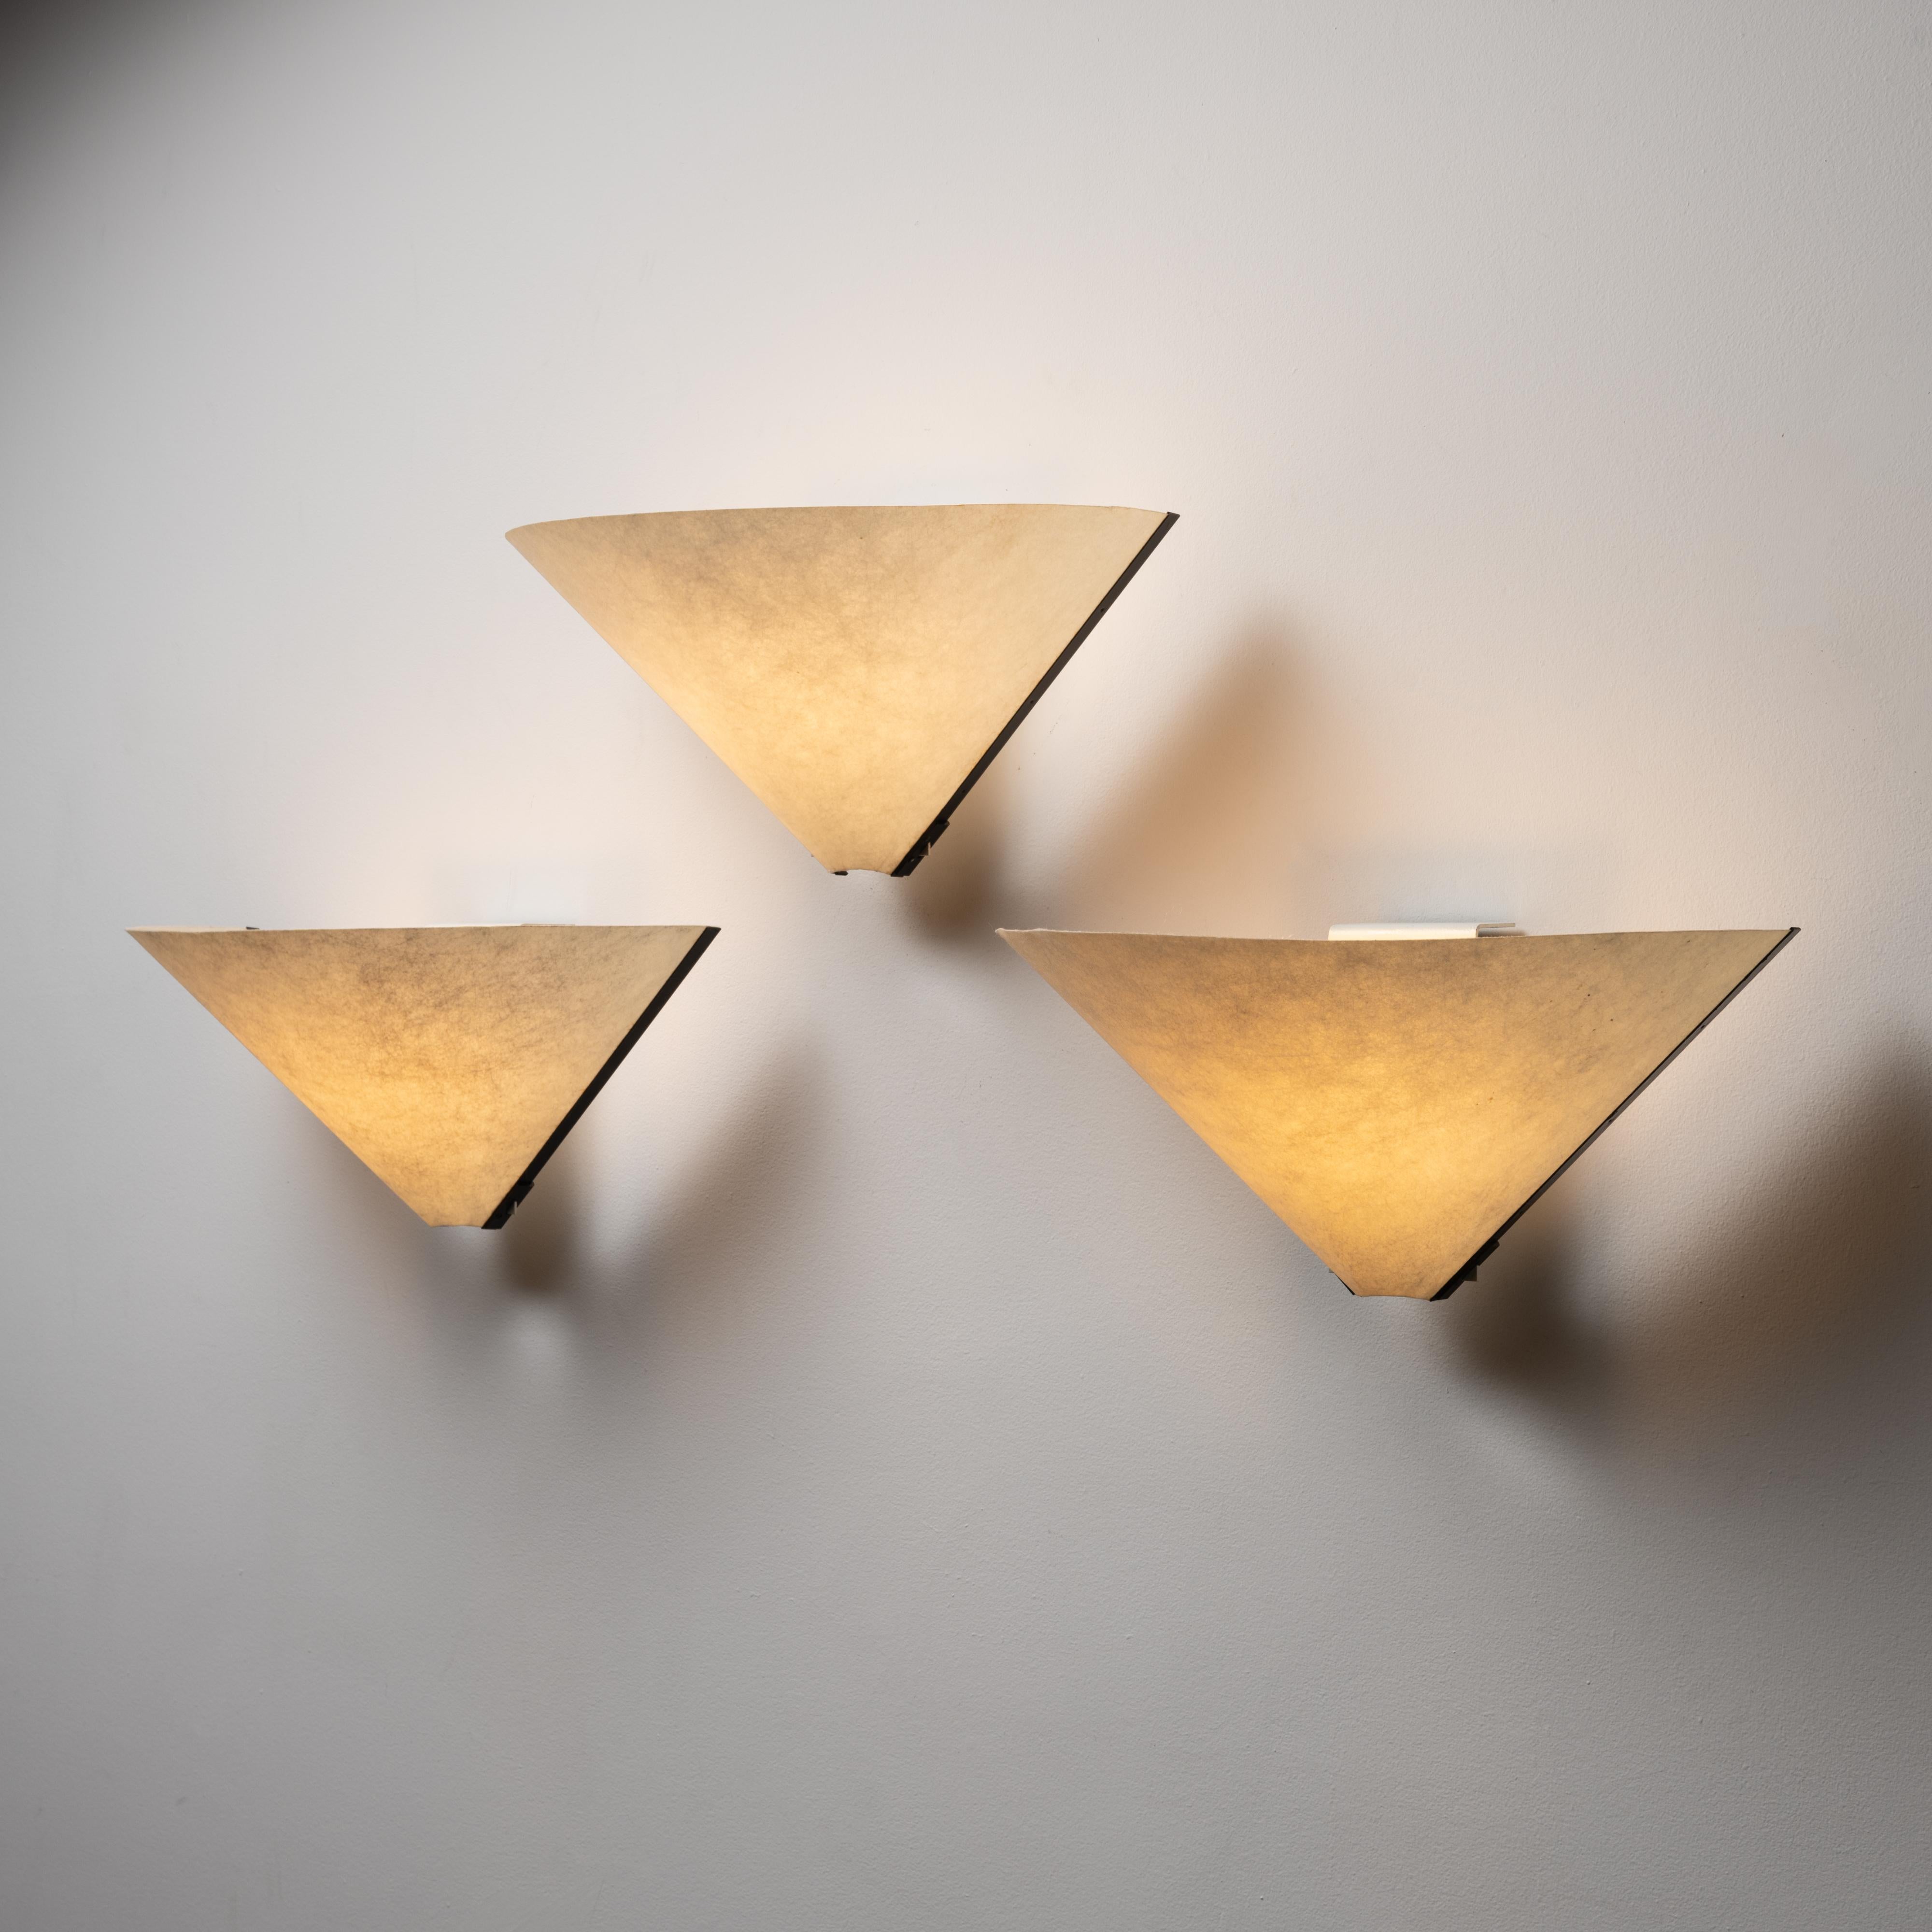 'Porsenna' wall sconces by Vico Magistretti for Artemide. Designed and manufactured in Italy, in 1977. The half-cone shade is made from a fibrous paper and provides a soft and consistent light diffusion. We recommend using a E27, 40w maximum bulb.